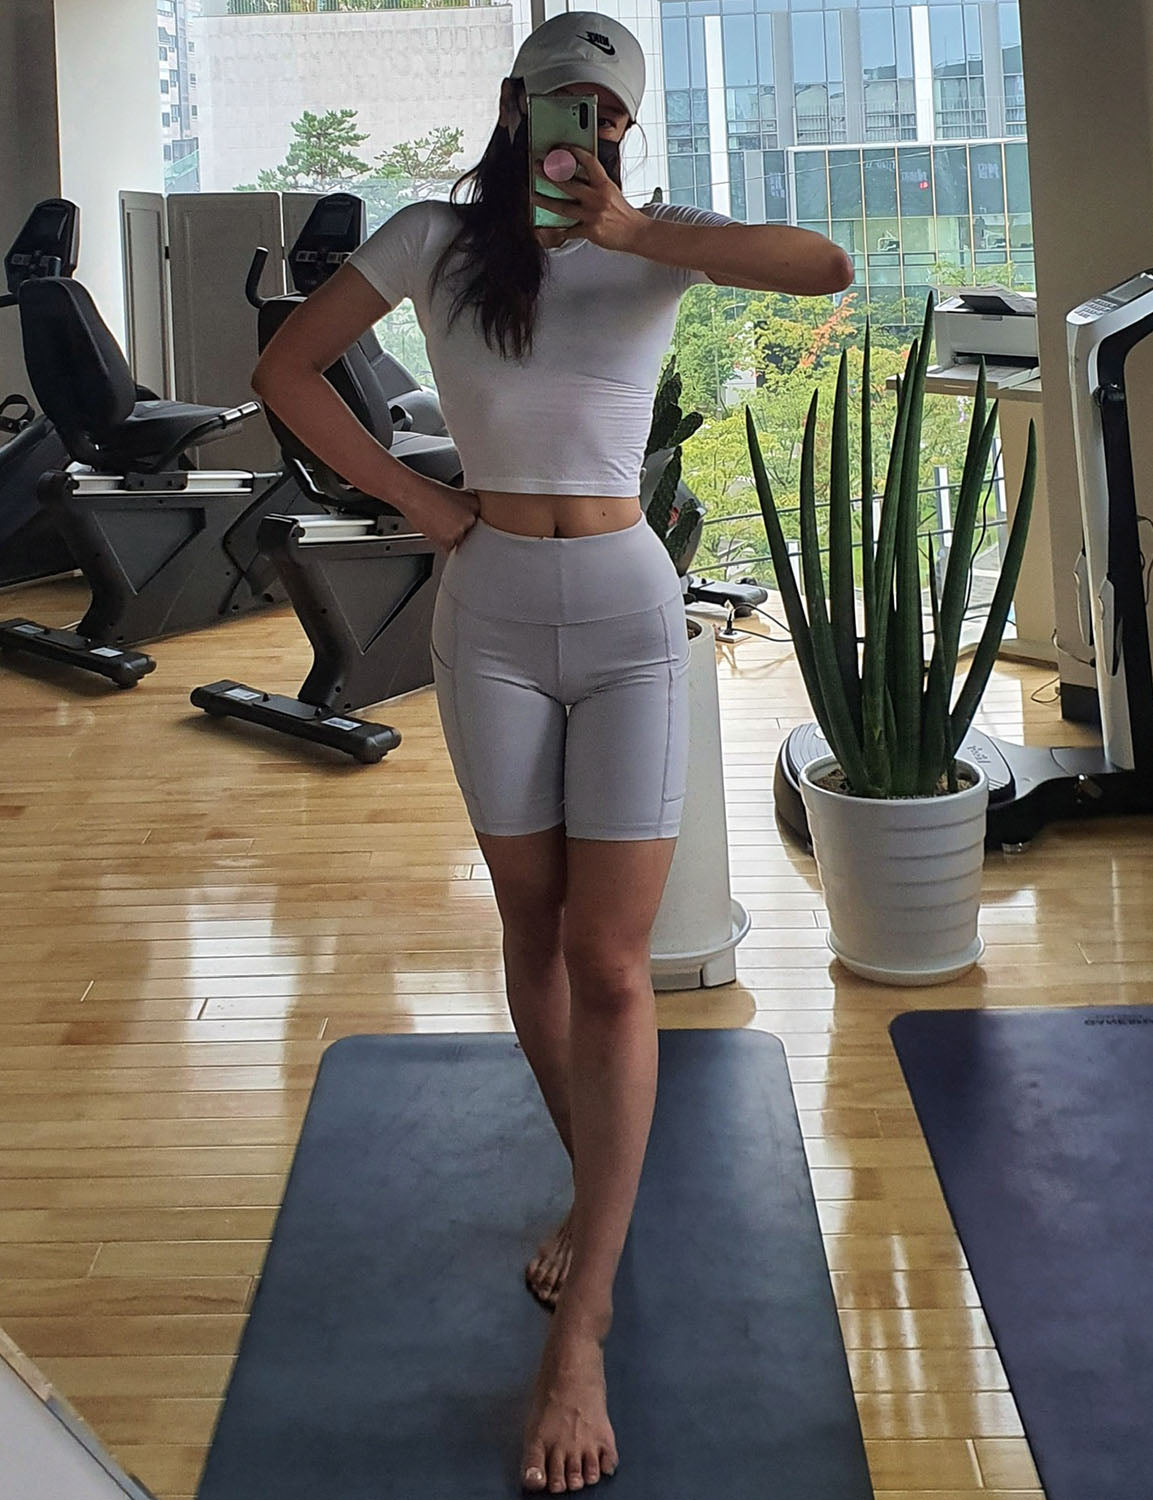 8" Side Pockets Yoga Shorts lightgray Sleek, soft, smooth and totally comfortable: our newest style is here. Softest-ever fabric High elasticity High density 4-way stretch Fabric doesn't attract lint easily No see-through Moisture-wicking Machine wash 75% Nylon, 25% Spandex